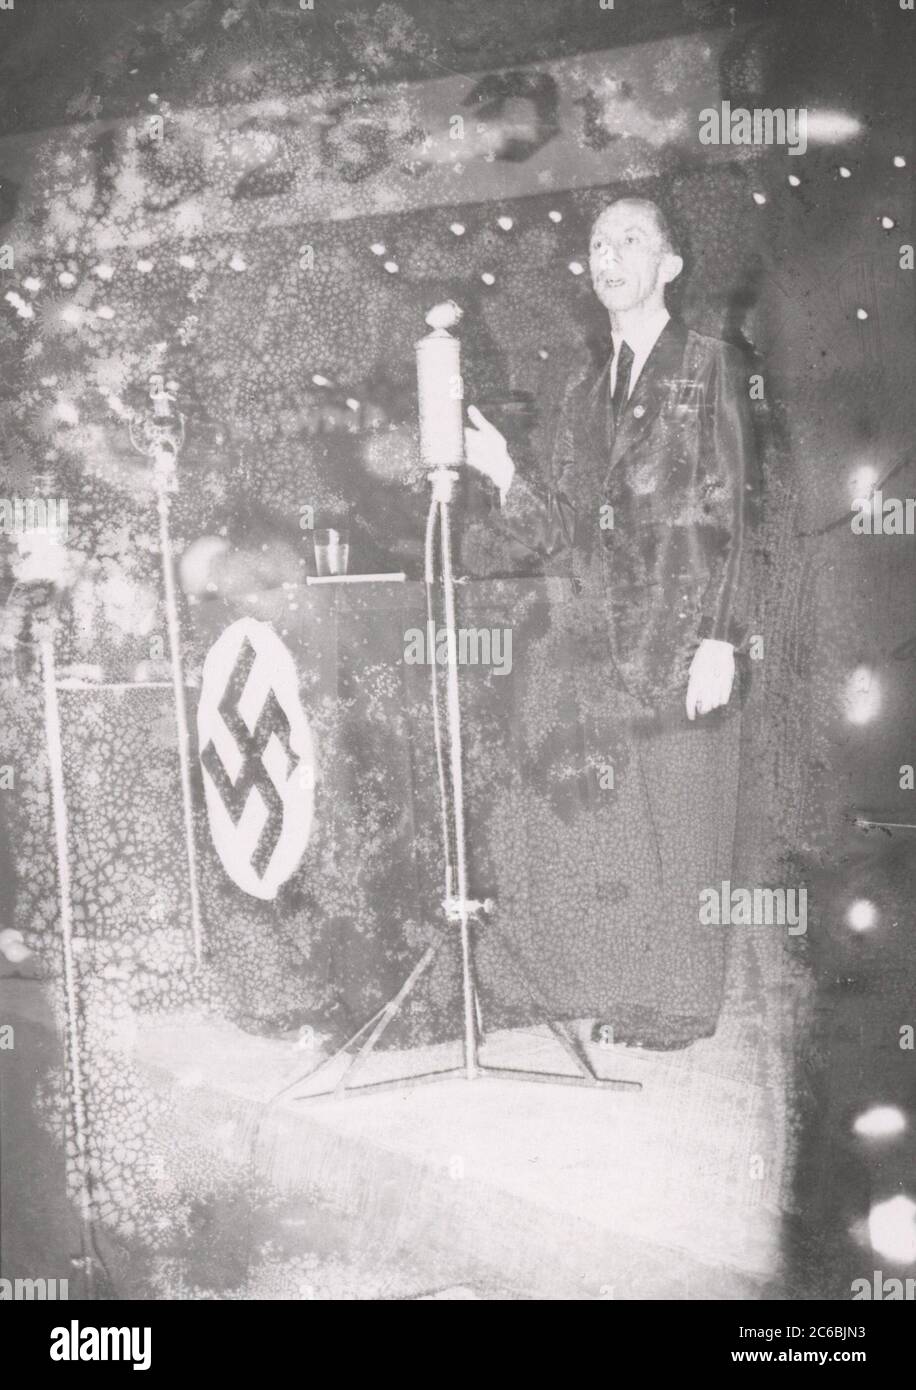 Rally in the Berlin Sportpalast - Goebbels speaks Heinrich Hoffmann Photographs 1934 Adolf Hitler's official photographer, and a Nazi politician and publisher, who was a member of Hitler's intimate circle. Stock Photo